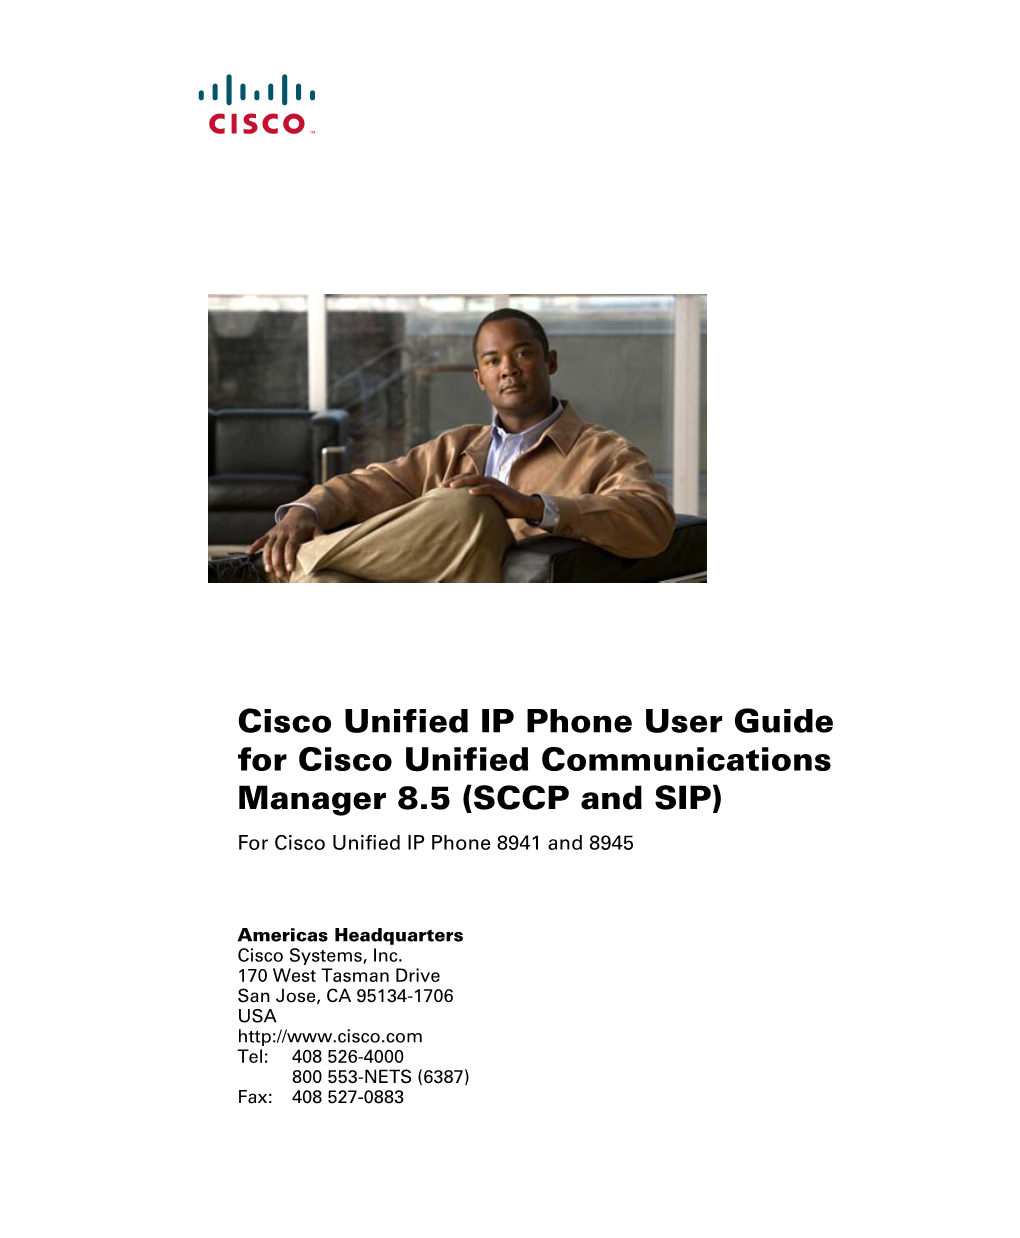 Cisco Unified IP Phone User Guide for Cisco Unified Communications Manager 8.5 (SCCP and SIP) for Cisco Unified IP Phone 8941 and 8945